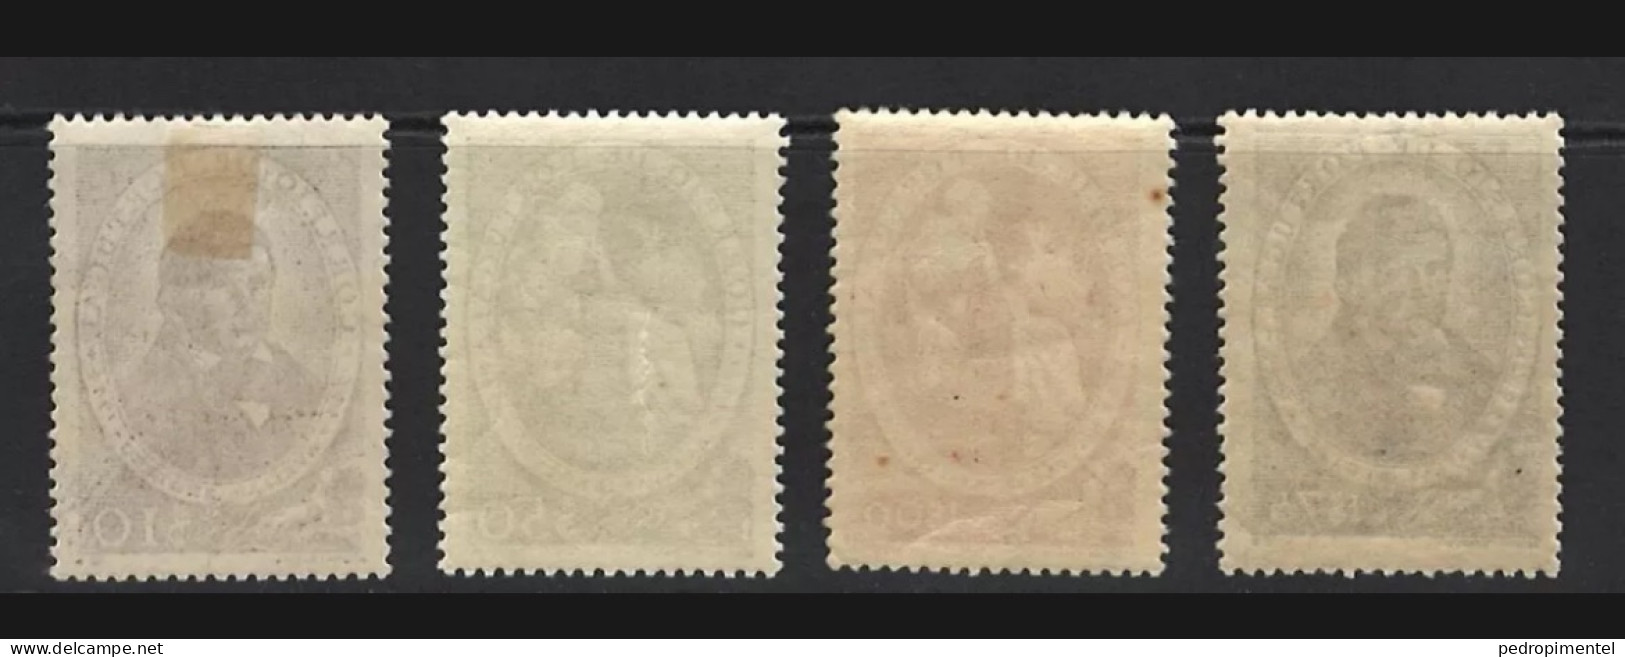 Portugal Stamps 1944 "Felix Avelar Botero" Condition MH OG #640-643 - Unused Stamps